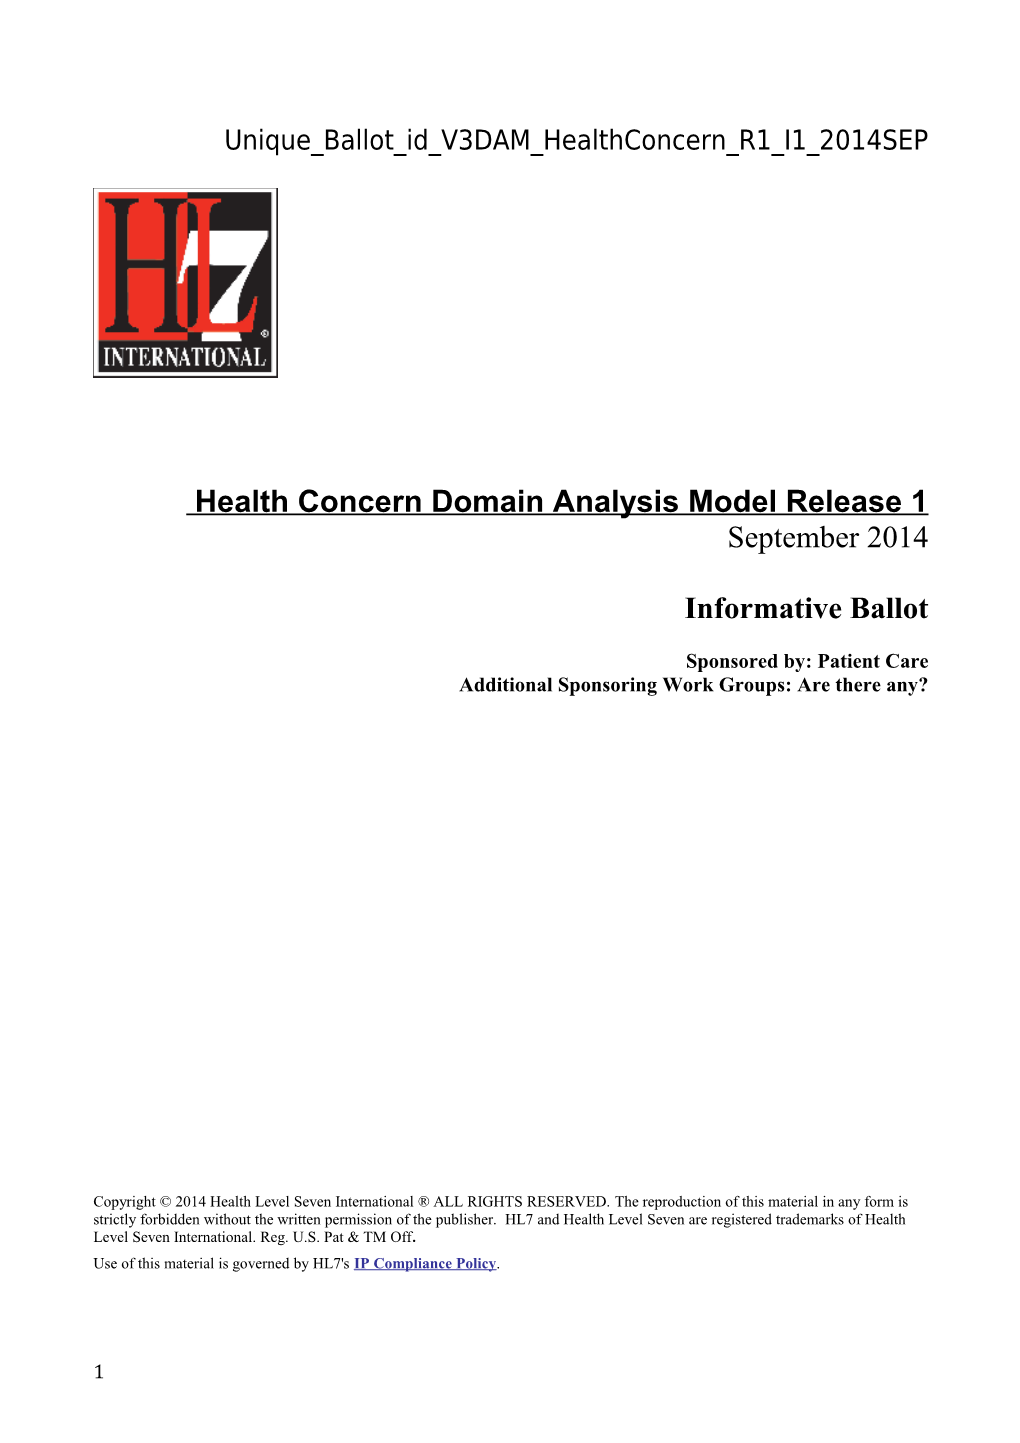 Health Concern Domain Analysis Model Release 1